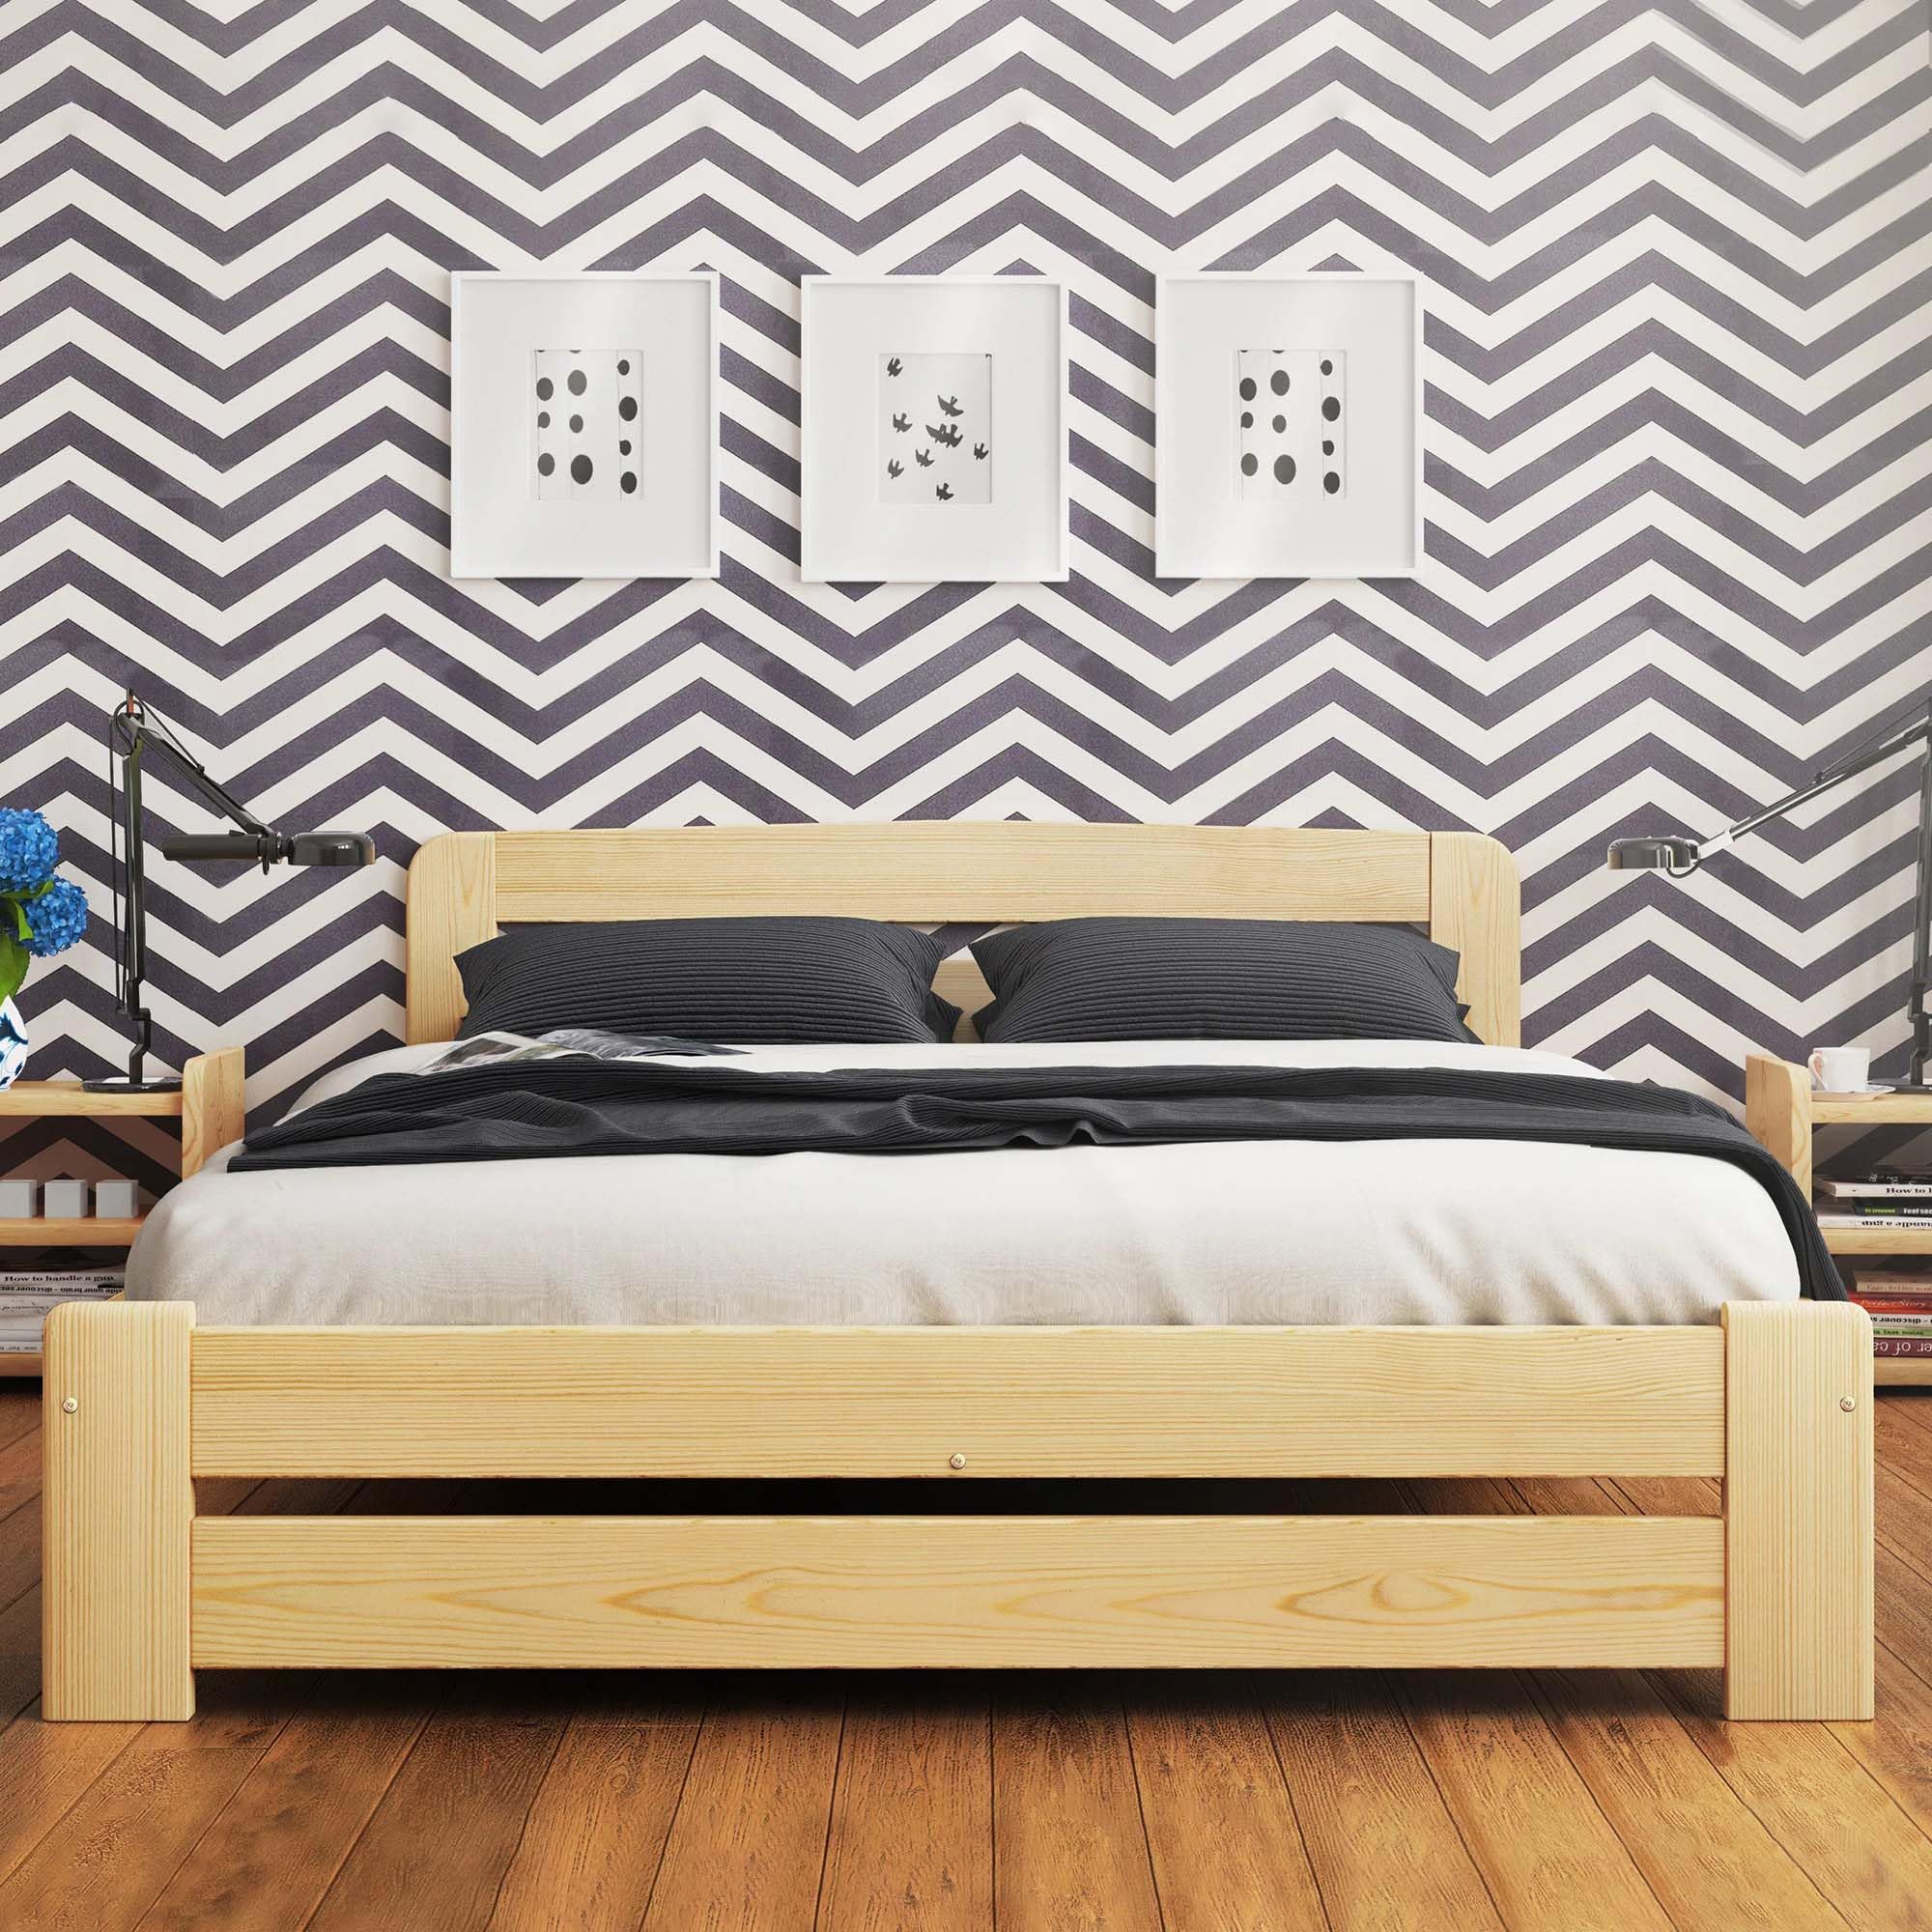 Nodax Wooden Single bed frame F1